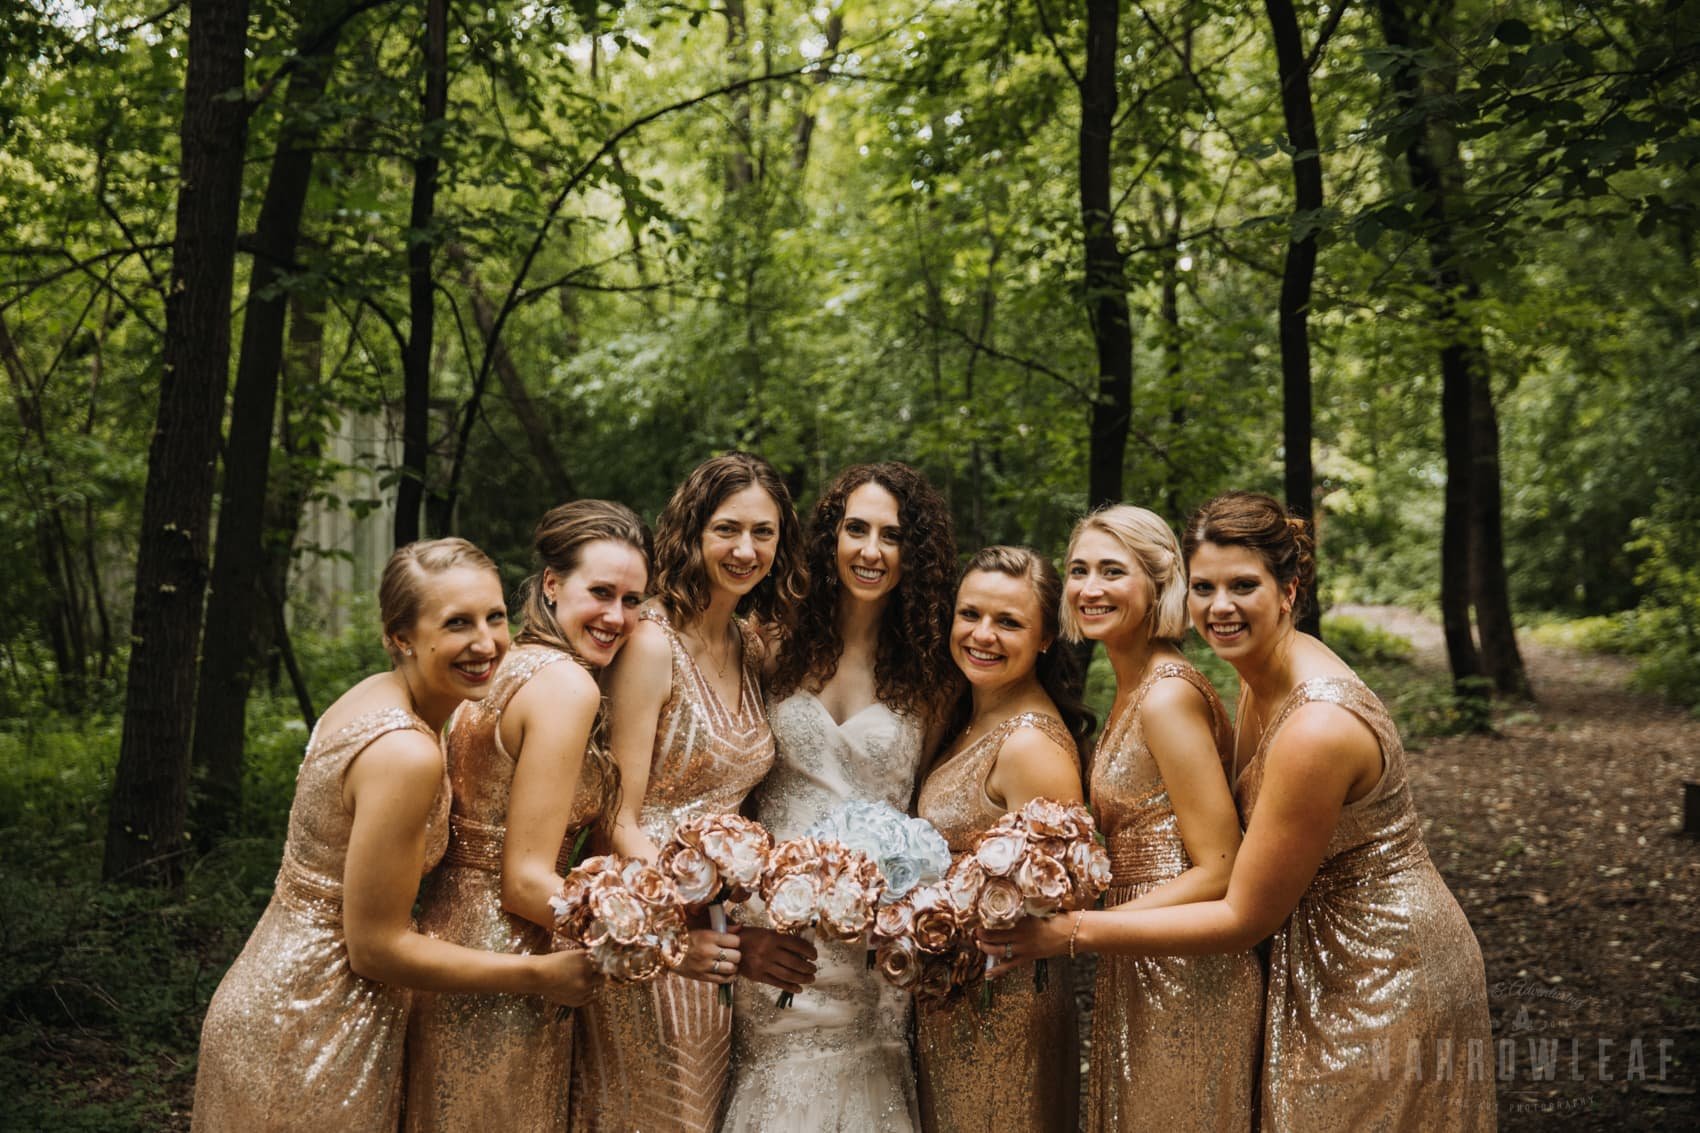 Camp-wooded-wedding-style-midwest-wi-bridal-party-302.jpg.jpg